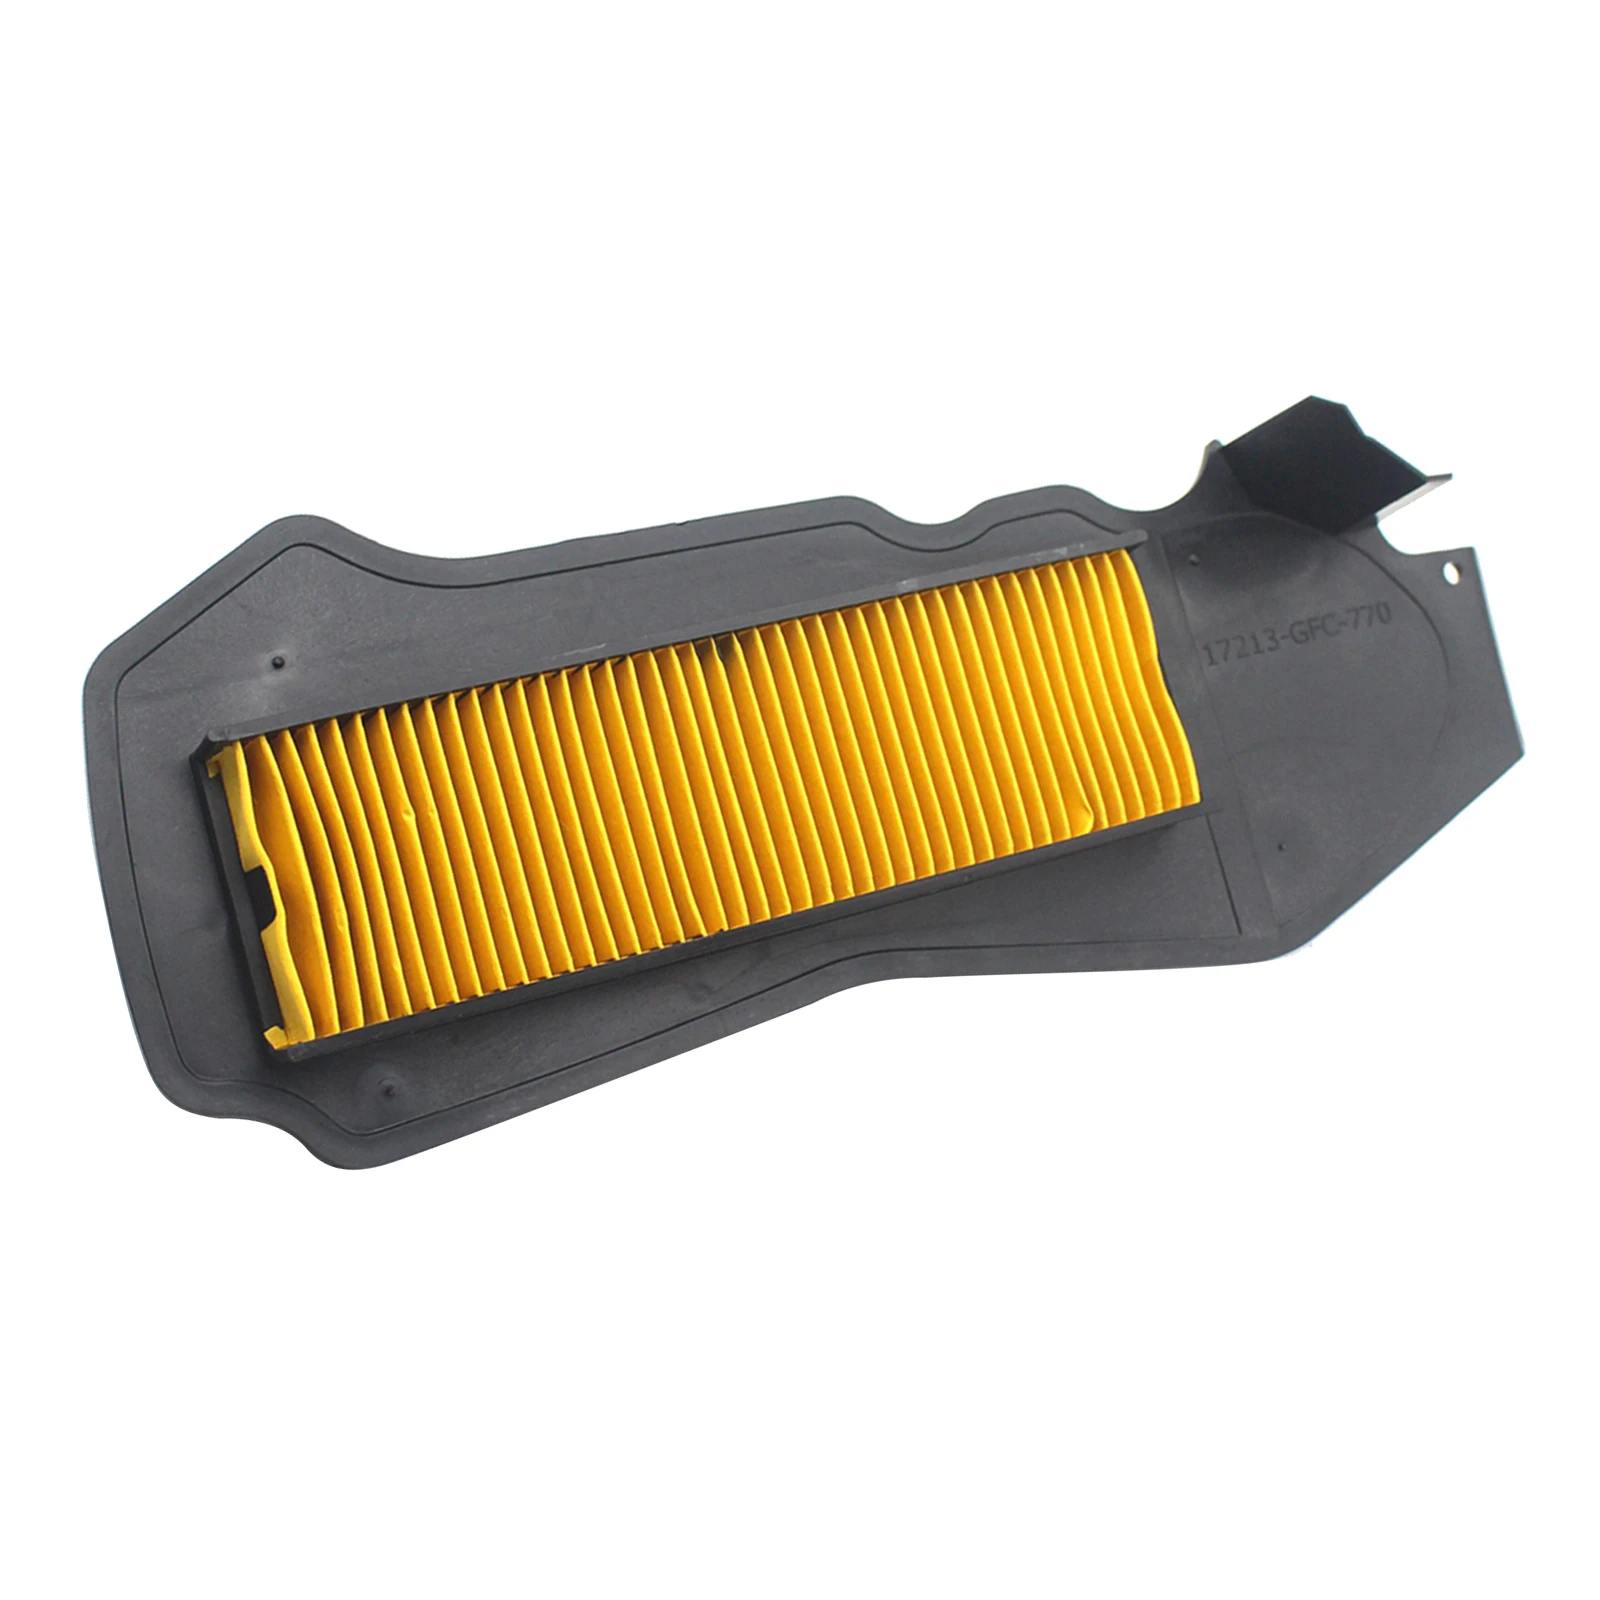 1x New Motorcycle Parts Air Filter for Dio AF68 Air Filter Cleaner